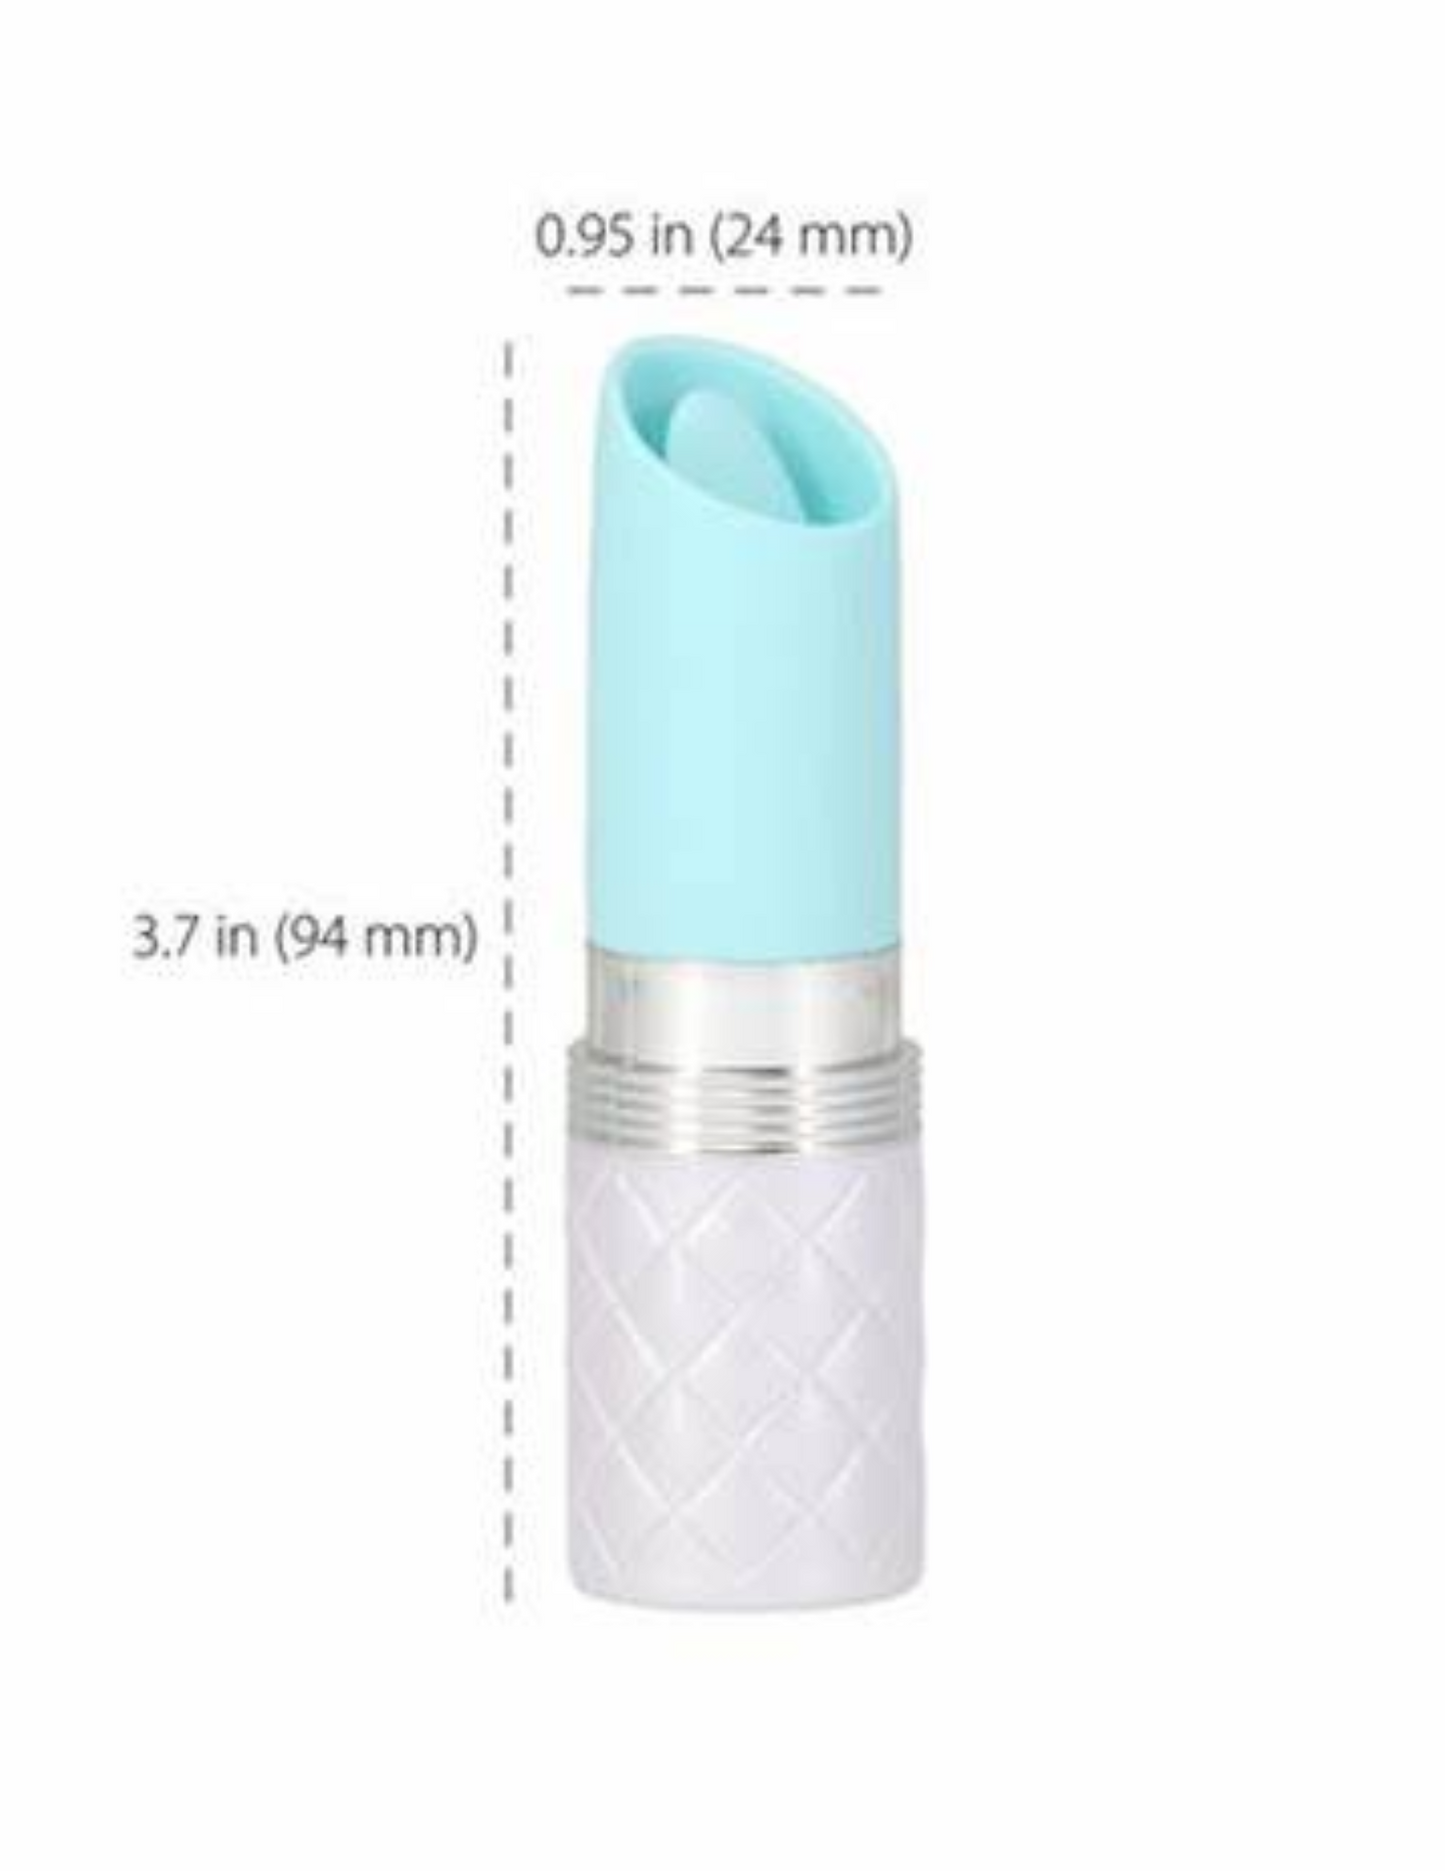 Diagram shows the dimensions of the Pillow Talk Lusty flicking vibrator (teal).